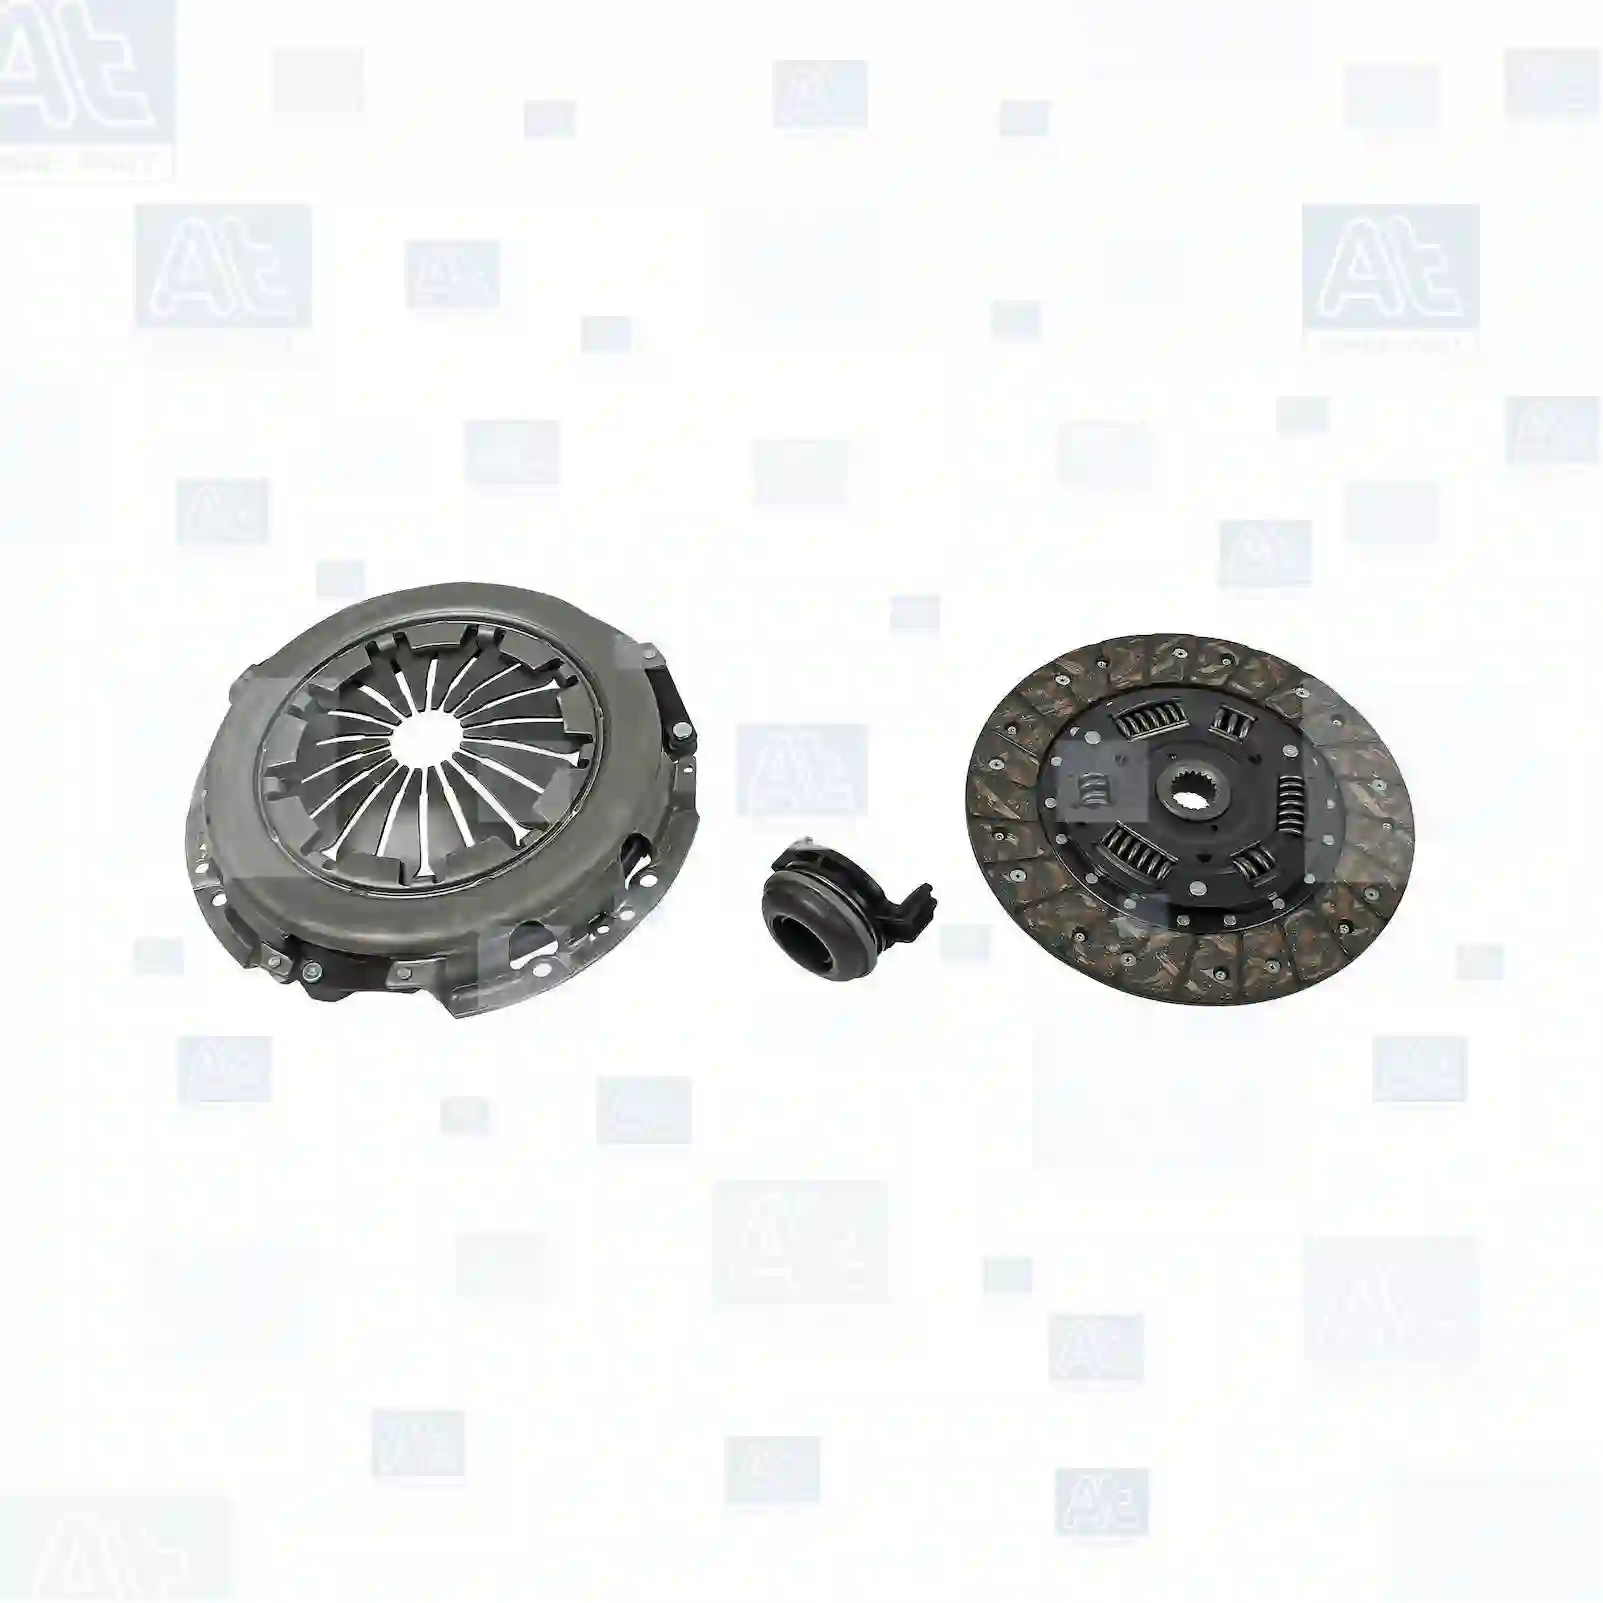 Clutch kit, with release bearing, 77722815, 2004L7, 2004Q8, 2004Q9, 2004R0, 2004R1, 2004R7, 2004R8, 2004T0, 2004T1, 205064, 205065, 2050Y9, 2050Z0, 205173, 2051A4, 9567208487, 9631260480S, 2004L7, 2004Q8, 2004Q9, 2004R0, 2004R1, 2004R7, 2004R8, 2004T0, 2004T1, 205064, 205065, 2050Y9, 2050Z0, 205173, 2051A4 ||  77722815 At Spare Part | Engine, Accelerator Pedal, Camshaft, Connecting Rod, Crankcase, Crankshaft, Cylinder Head, Engine Suspension Mountings, Exhaust Manifold, Exhaust Gas Recirculation, Filter Kits, Flywheel Housing, General Overhaul Kits, Engine, Intake Manifold, Oil Cleaner, Oil Cooler, Oil Filter, Oil Pump, Oil Sump, Piston & Liner, Sensor & Switch, Timing Case, Turbocharger, Cooling System, Belt Tensioner, Coolant Filter, Coolant Pipe, Corrosion Prevention Agent, Drive, Expansion Tank, Fan, Intercooler, Monitors & Gauges, Radiator, Thermostat, V-Belt / Timing belt, Water Pump, Fuel System, Electronical Injector Unit, Feed Pump, Fuel Filter, cpl., Fuel Gauge Sender,  Fuel Line, Fuel Pump, Fuel Tank, Injection Line Kit, Injection Pump, Exhaust System, Clutch & Pedal, Gearbox, Propeller Shaft, Axles, Brake System, Hubs & Wheels, Suspension, Leaf Spring, Universal Parts / Accessories, Steering, Electrical System, Cabin Clutch kit, with release bearing, 77722815, 2004L7, 2004Q8, 2004Q9, 2004R0, 2004R1, 2004R7, 2004R8, 2004T0, 2004T1, 205064, 205065, 2050Y9, 2050Z0, 205173, 2051A4, 9567208487, 9631260480S, 2004L7, 2004Q8, 2004Q9, 2004R0, 2004R1, 2004R7, 2004R8, 2004T0, 2004T1, 205064, 205065, 2050Y9, 2050Z0, 205173, 2051A4 ||  77722815 At Spare Part | Engine, Accelerator Pedal, Camshaft, Connecting Rod, Crankcase, Crankshaft, Cylinder Head, Engine Suspension Mountings, Exhaust Manifold, Exhaust Gas Recirculation, Filter Kits, Flywheel Housing, General Overhaul Kits, Engine, Intake Manifold, Oil Cleaner, Oil Cooler, Oil Filter, Oil Pump, Oil Sump, Piston & Liner, Sensor & Switch, Timing Case, Turbocharger, Cooling System, Belt Tensioner, Coolant Filter, Coolant Pipe, Corrosion Prevention Agent, Drive, Expansion Tank, Fan, Intercooler, Monitors & Gauges, Radiator, Thermostat, V-Belt / Timing belt, Water Pump, Fuel System, Electronical Injector Unit, Feed Pump, Fuel Filter, cpl., Fuel Gauge Sender,  Fuel Line, Fuel Pump, Fuel Tank, Injection Line Kit, Injection Pump, Exhaust System, Clutch & Pedal, Gearbox, Propeller Shaft, Axles, Brake System, Hubs & Wheels, Suspension, Leaf Spring, Universal Parts / Accessories, Steering, Electrical System, Cabin